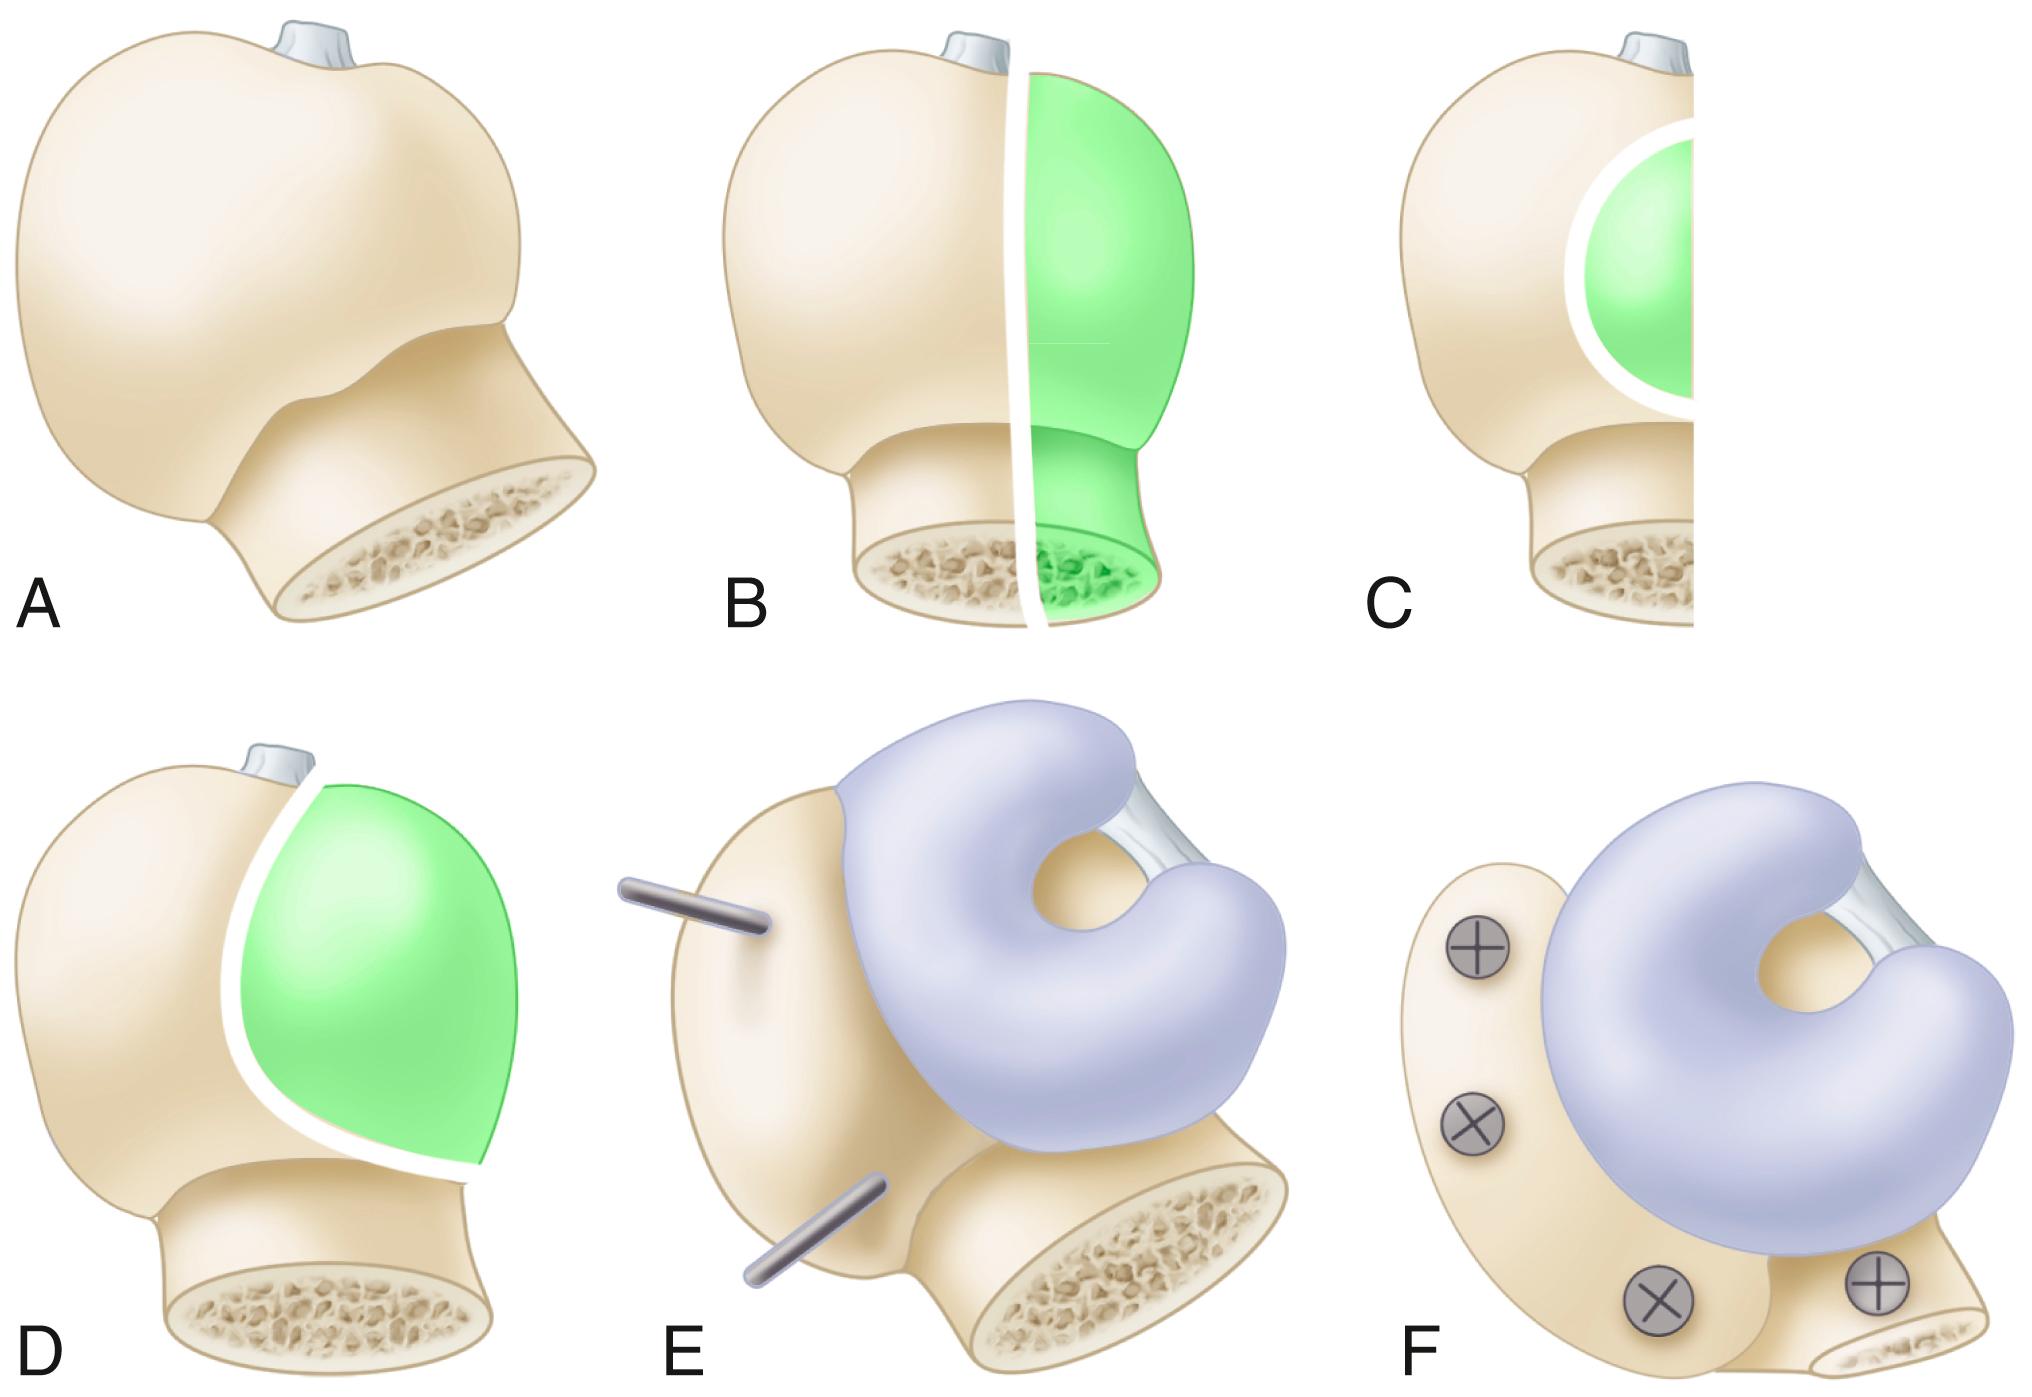 FIGURE 3.88, Bone graft, superior and posterior aspect of acetabulum. Large bone bank femoral head with some neck attached (A) is cut in coronal plane (B) so that upper part is slightly more than half of head. C, Full-thickness elliptical piece of bone is cut out with end-cutting reciprocating saw. This concave surface of graft is placed on convex surface of pelvis above and posterior to acetabulum. D, Graft is rotated 90 degrees, and another elliptical cut is made that is slightly smaller than diameter of acetabulum. Several fittings are necessary for graft to have maximal contact with underlying bone. E, Graft is temporarily fixed to underlying bone with two Kirschner wires. F, Four lag screws fix graft to pelvis. High-speed burr and reamers are used to finish contouring graft.